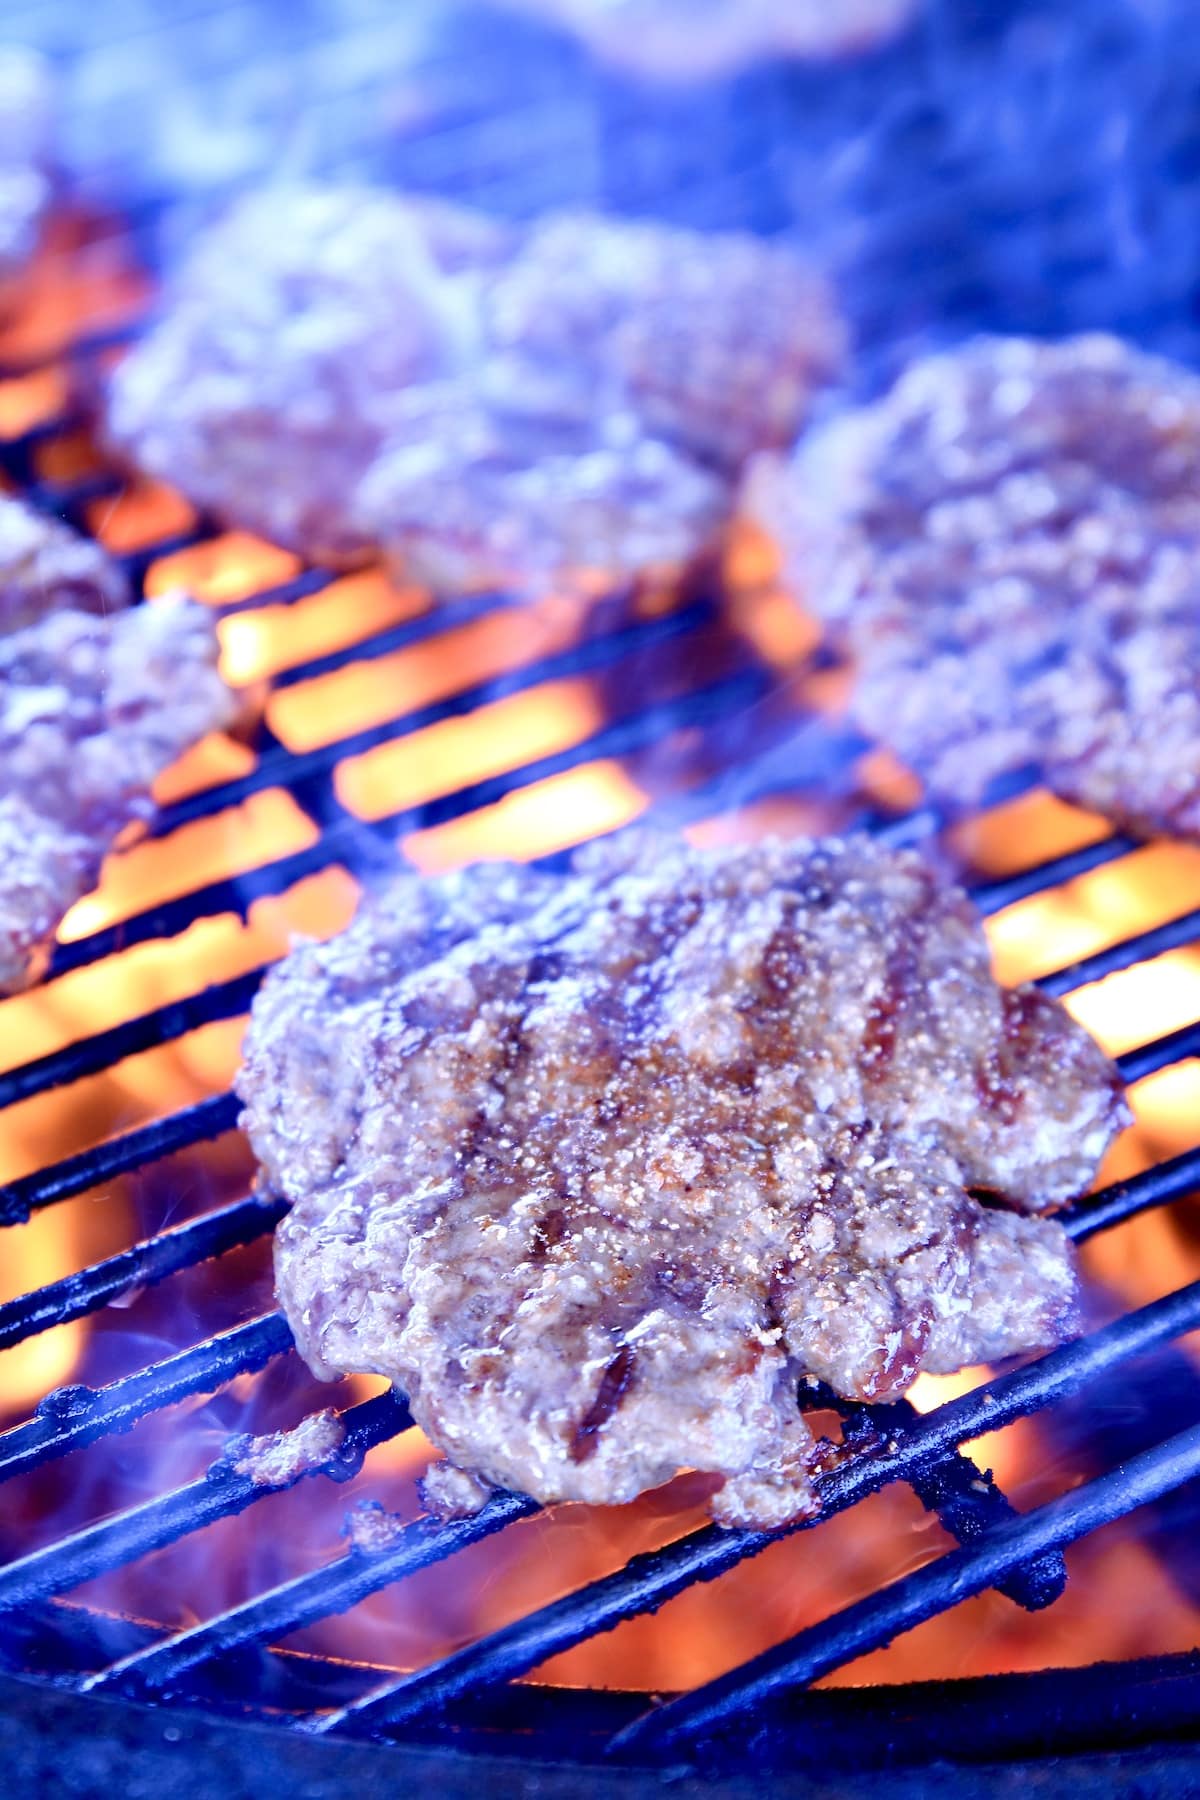 Grilling burger patties over open flame.